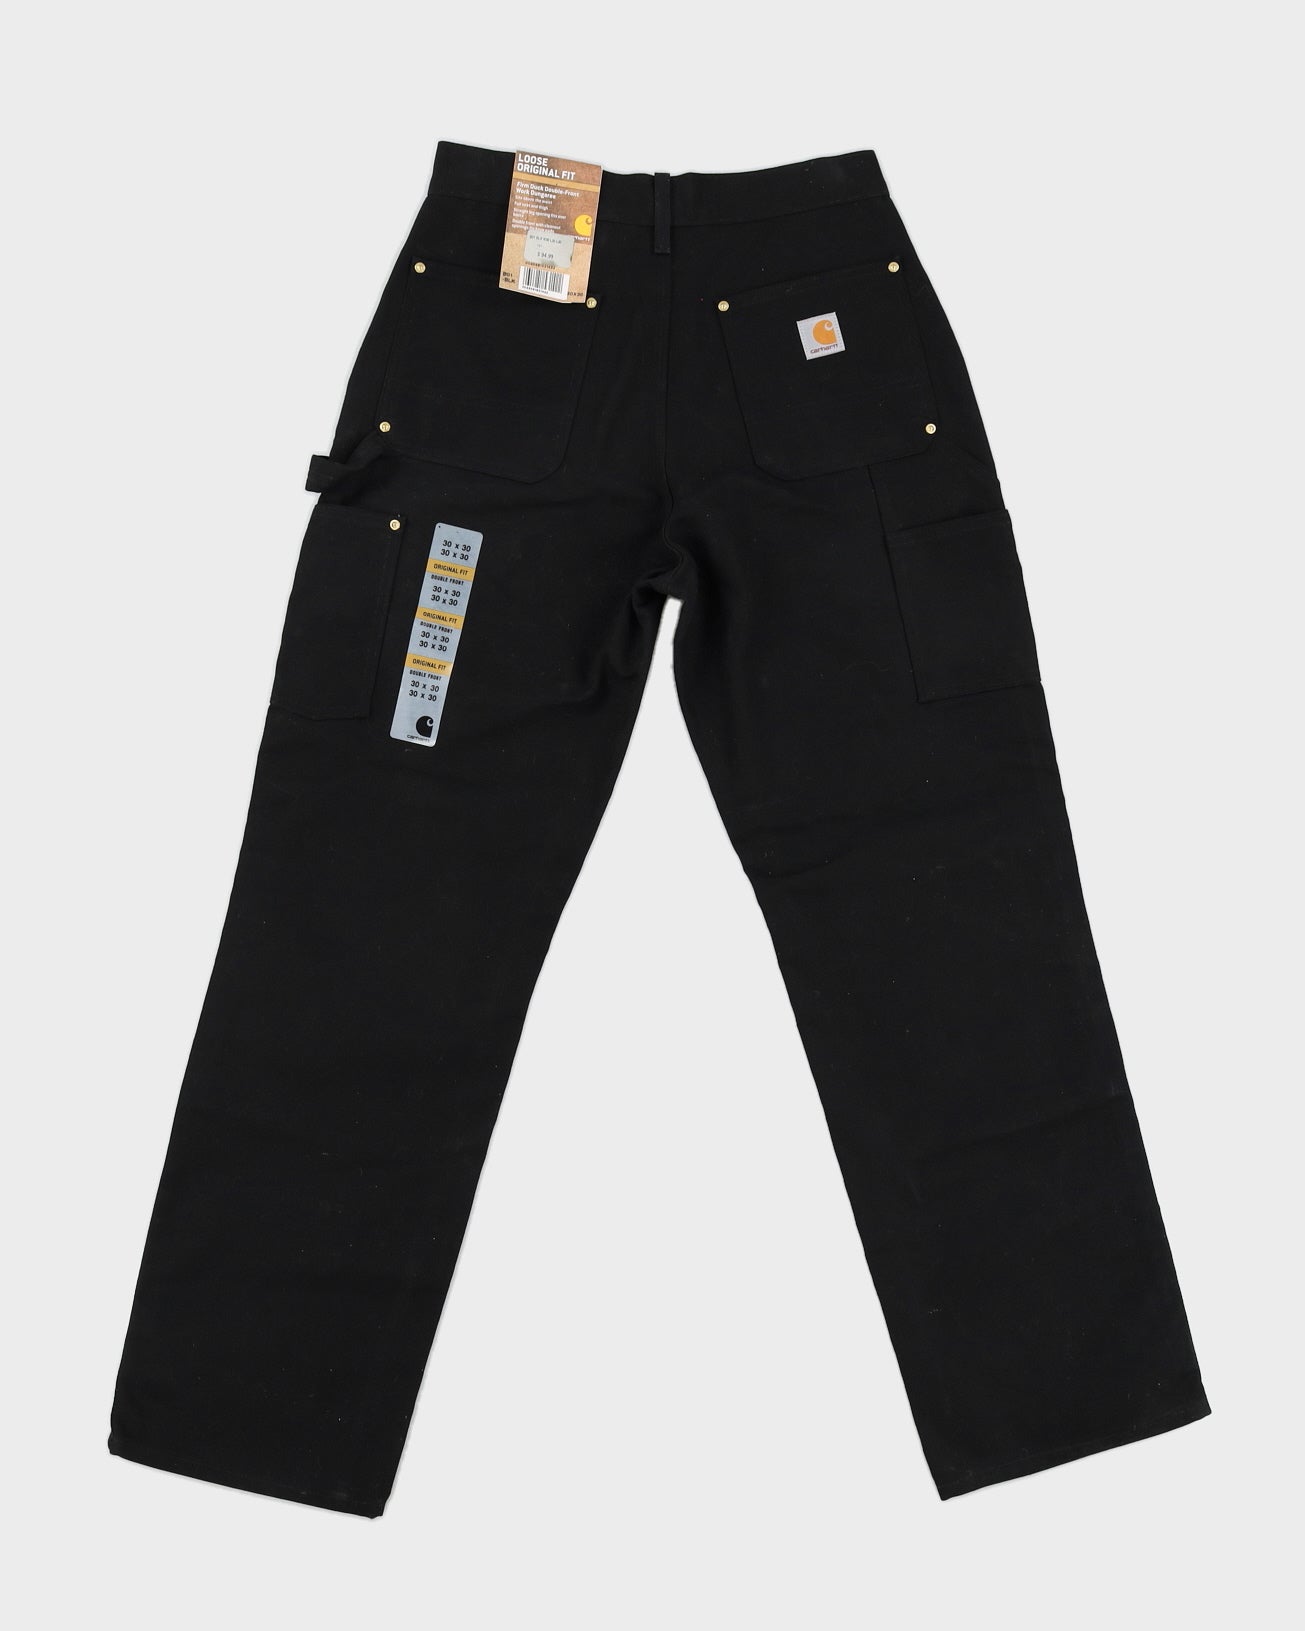 Carhartt Black Double Knee Work Trousers Deadstock With Tags  - W30 L30